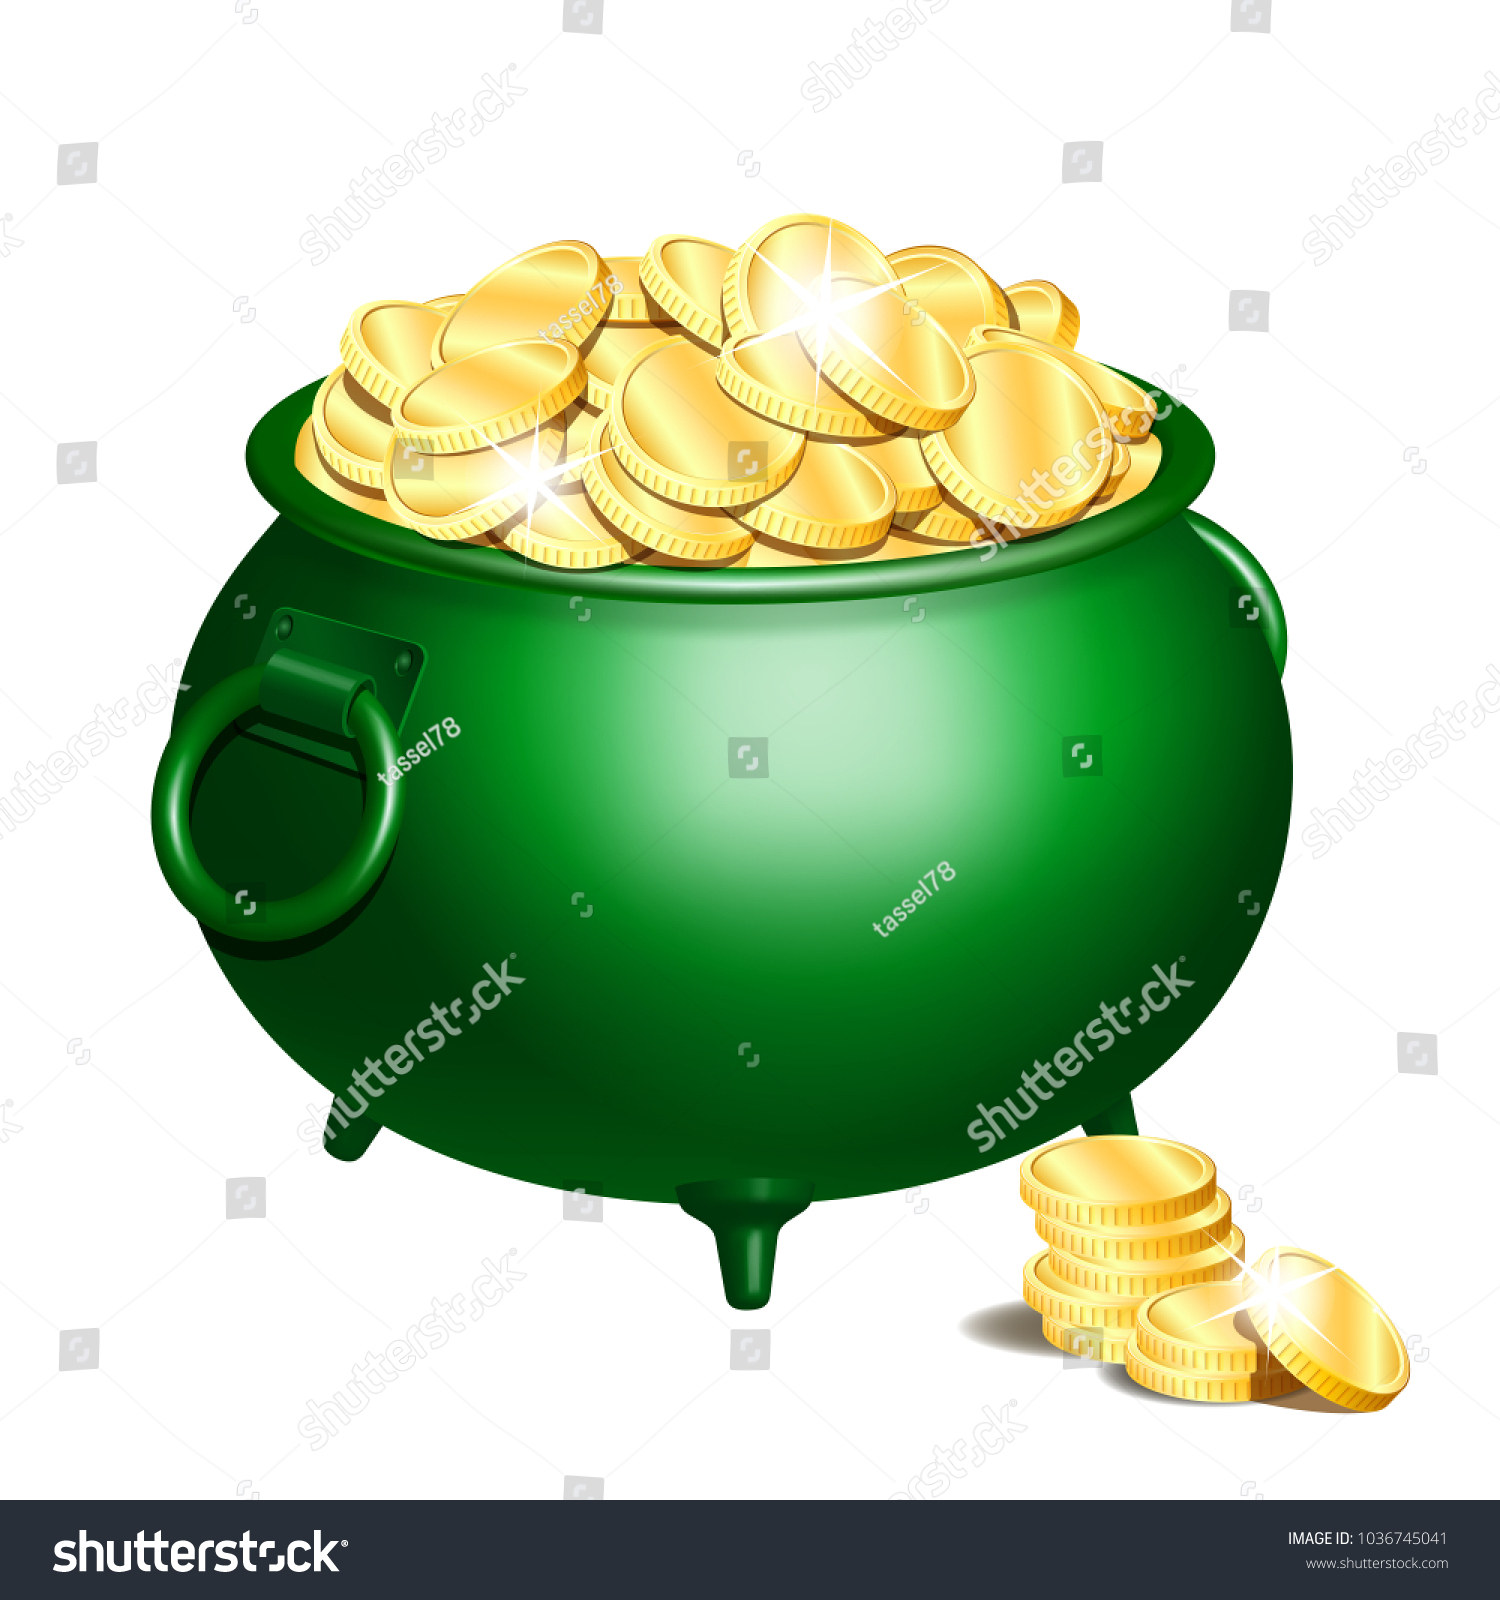 Green iron cauldron full of gold coins isolated on white background. Stack of gold coins near the green pot. St. Patricks Day symbol. Vector illustration. #1036745041